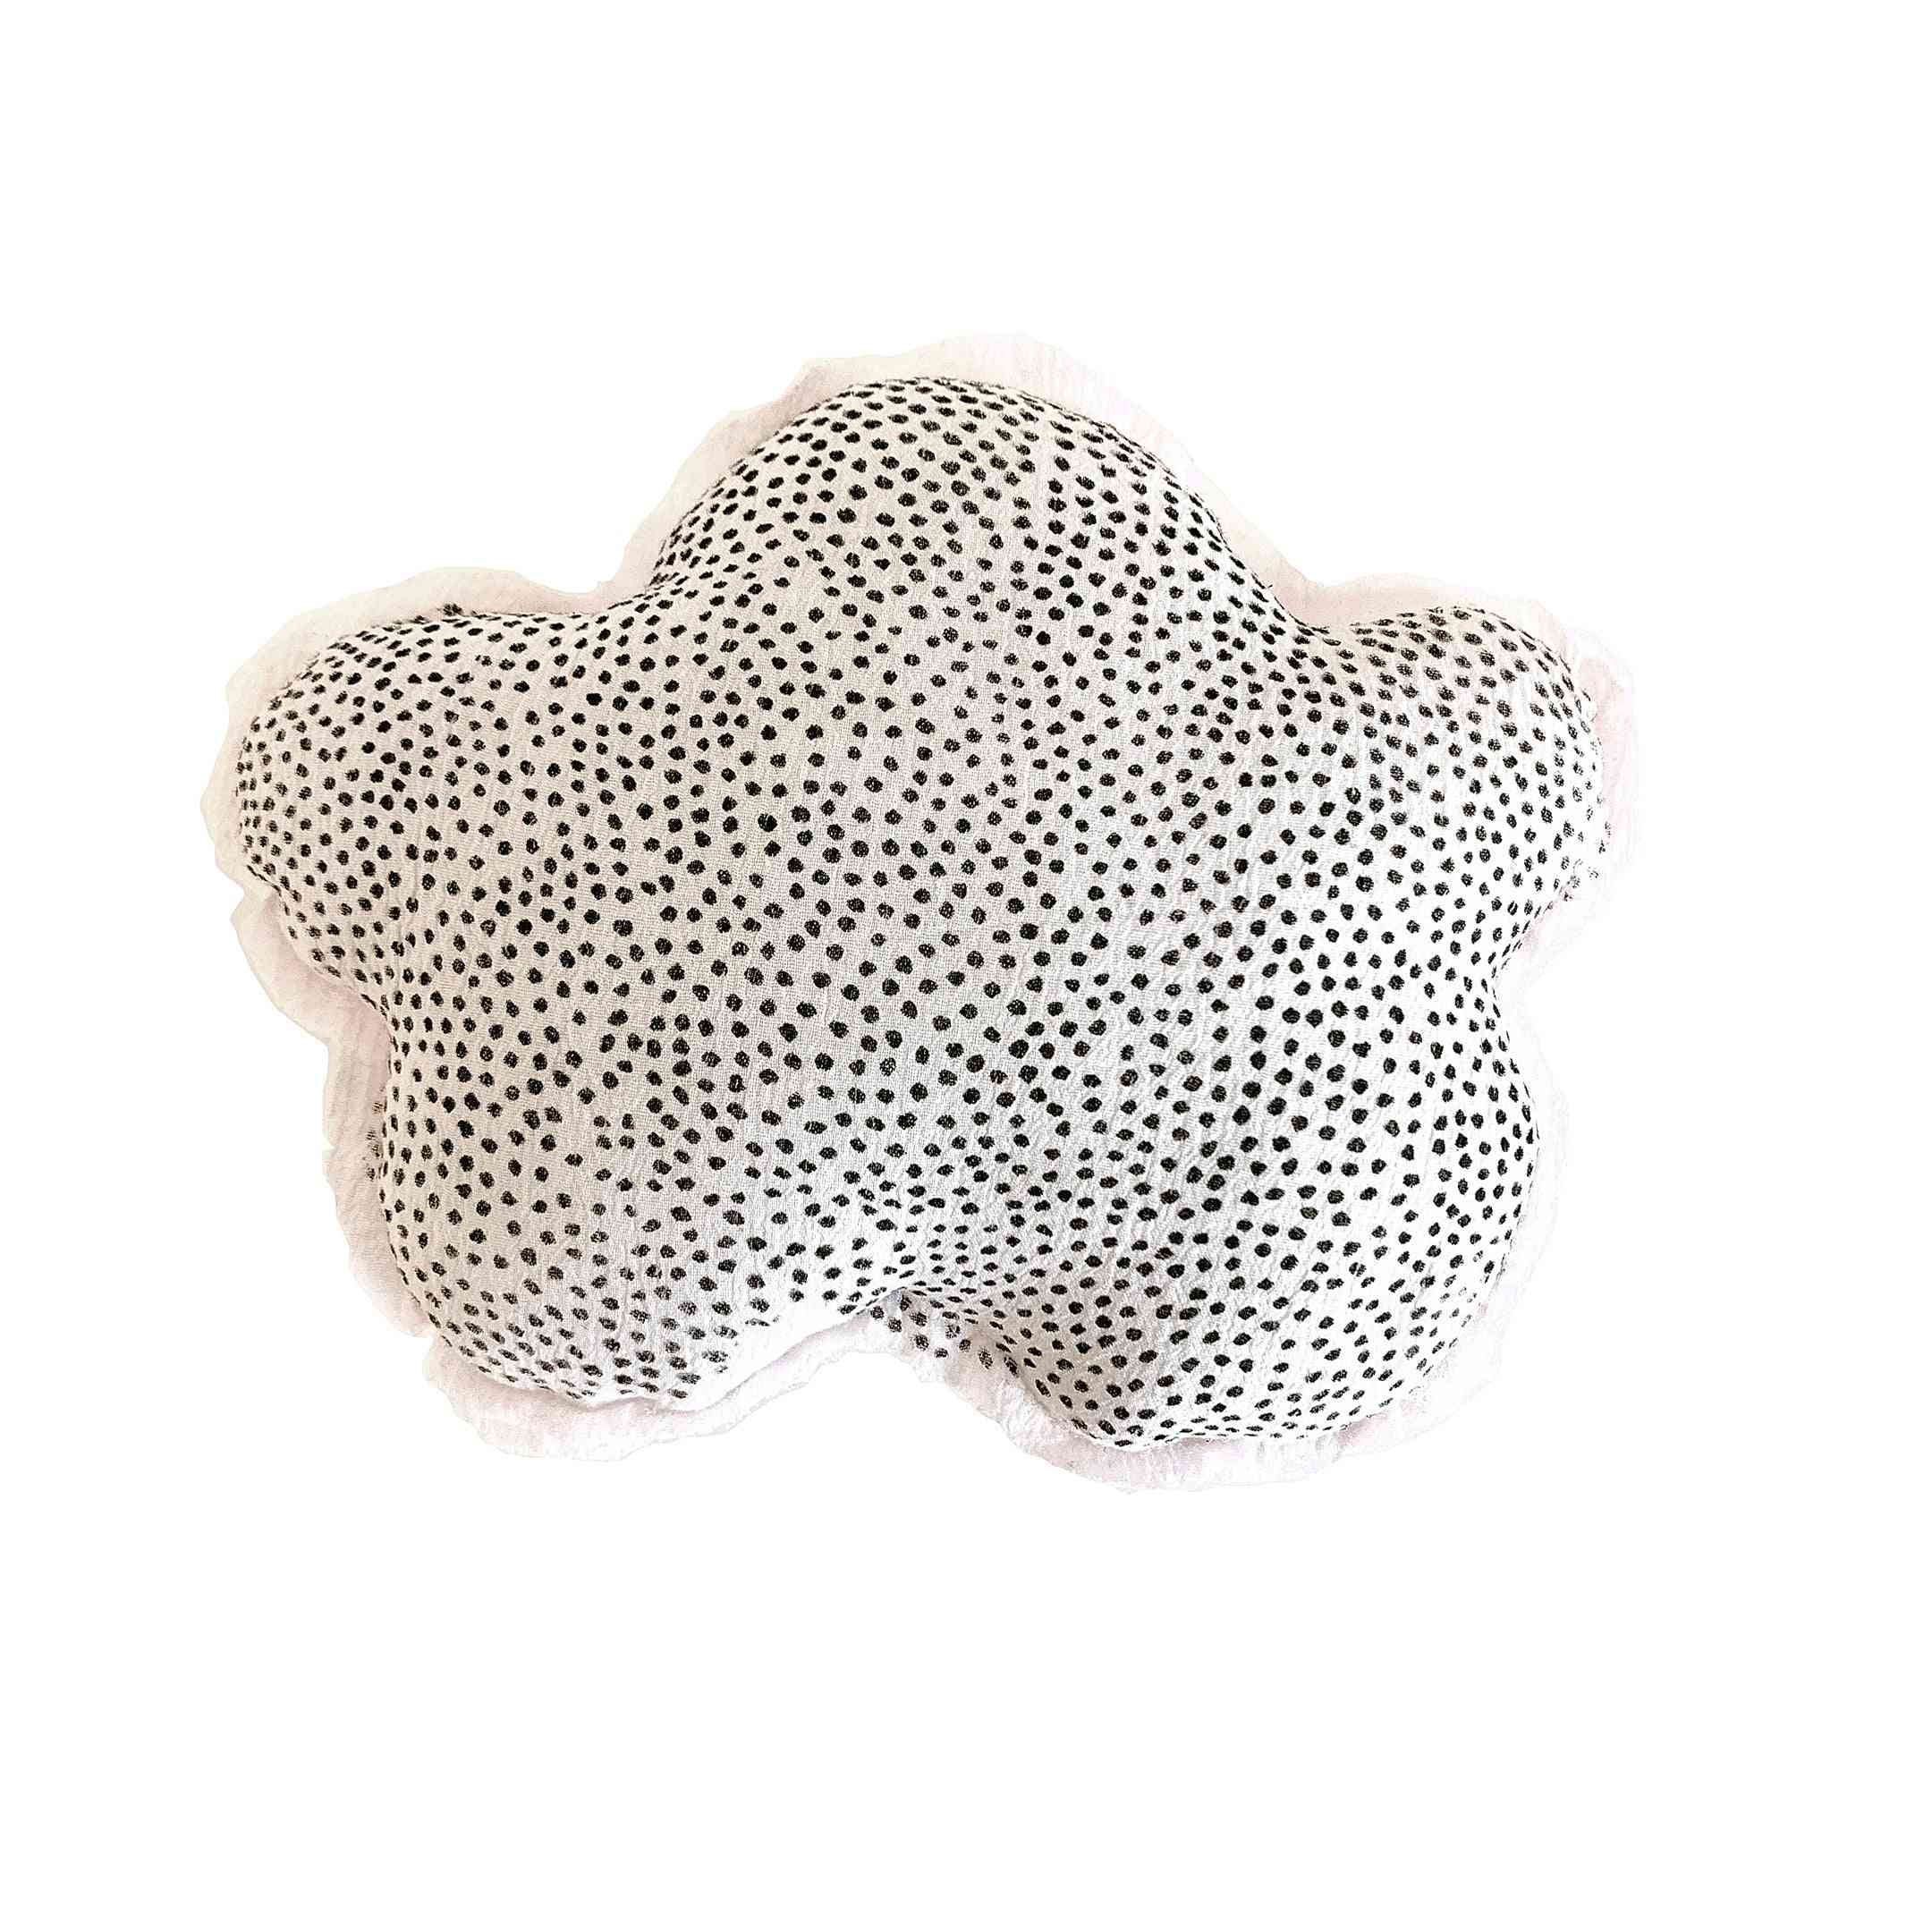 Little Beige Cloud Sshaped Pillow With Speckled Print